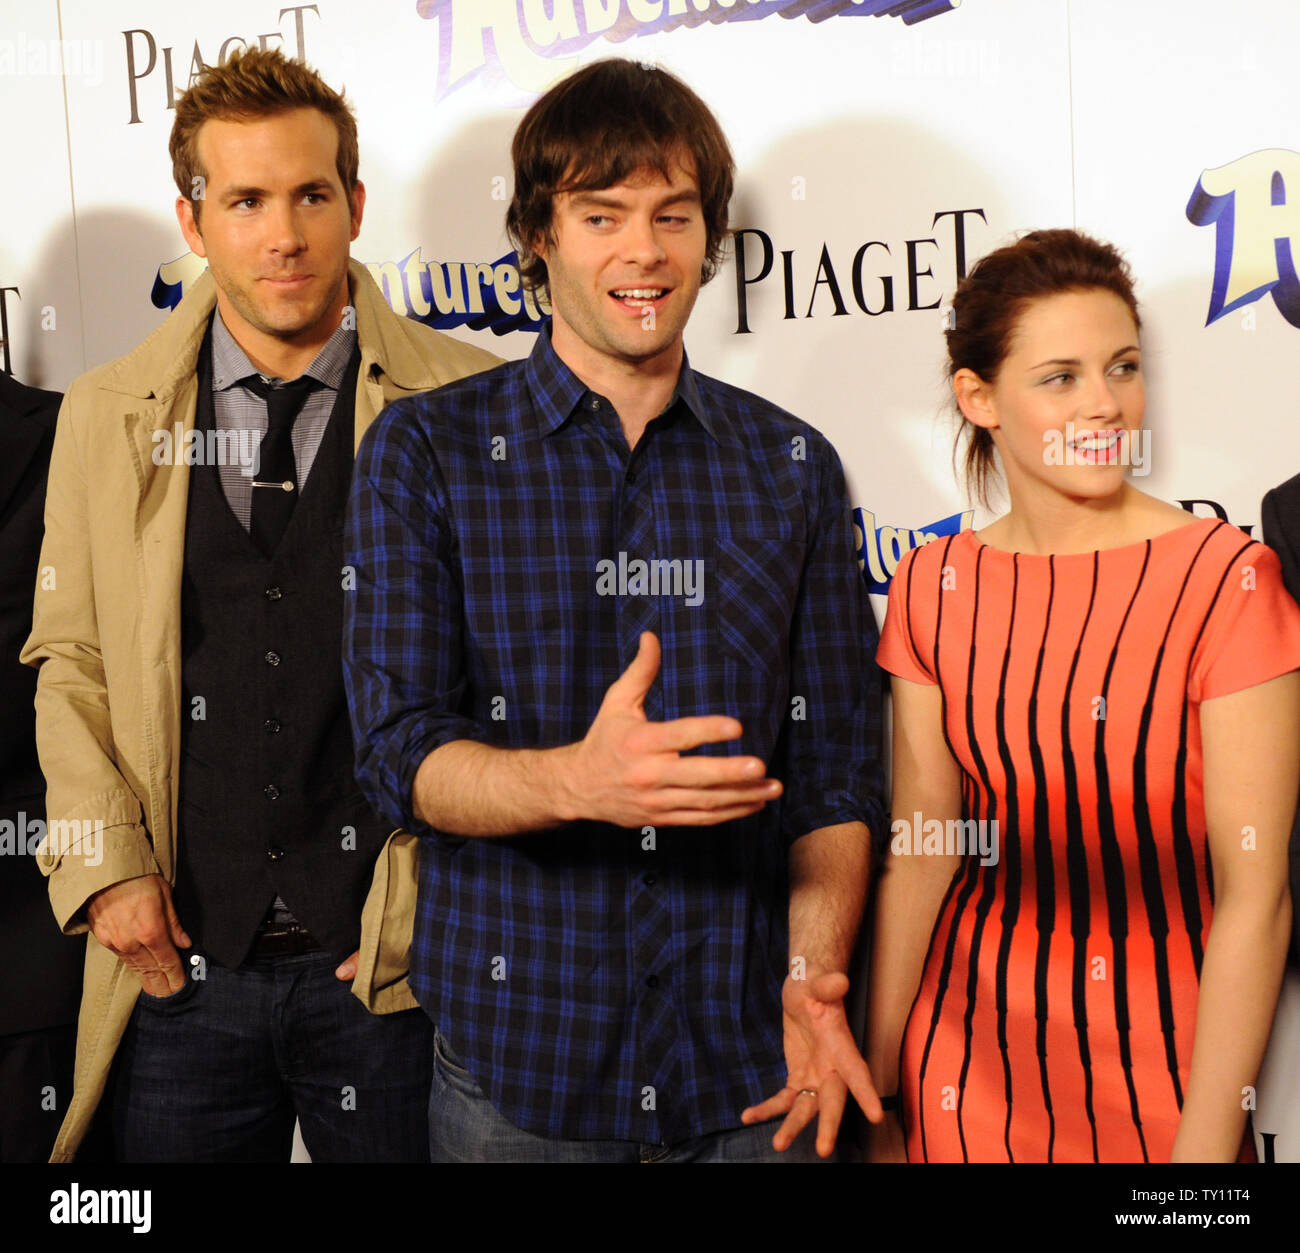 Cast members Ryan Reynolds, Bill Hader and Kristen Stewart (L-R) attend the premiere of the motion picture comedy 'Adventureland' in Los Angeles on March 16, 2009.  (UPI Photo/Jim Ruymen) Stock Photo